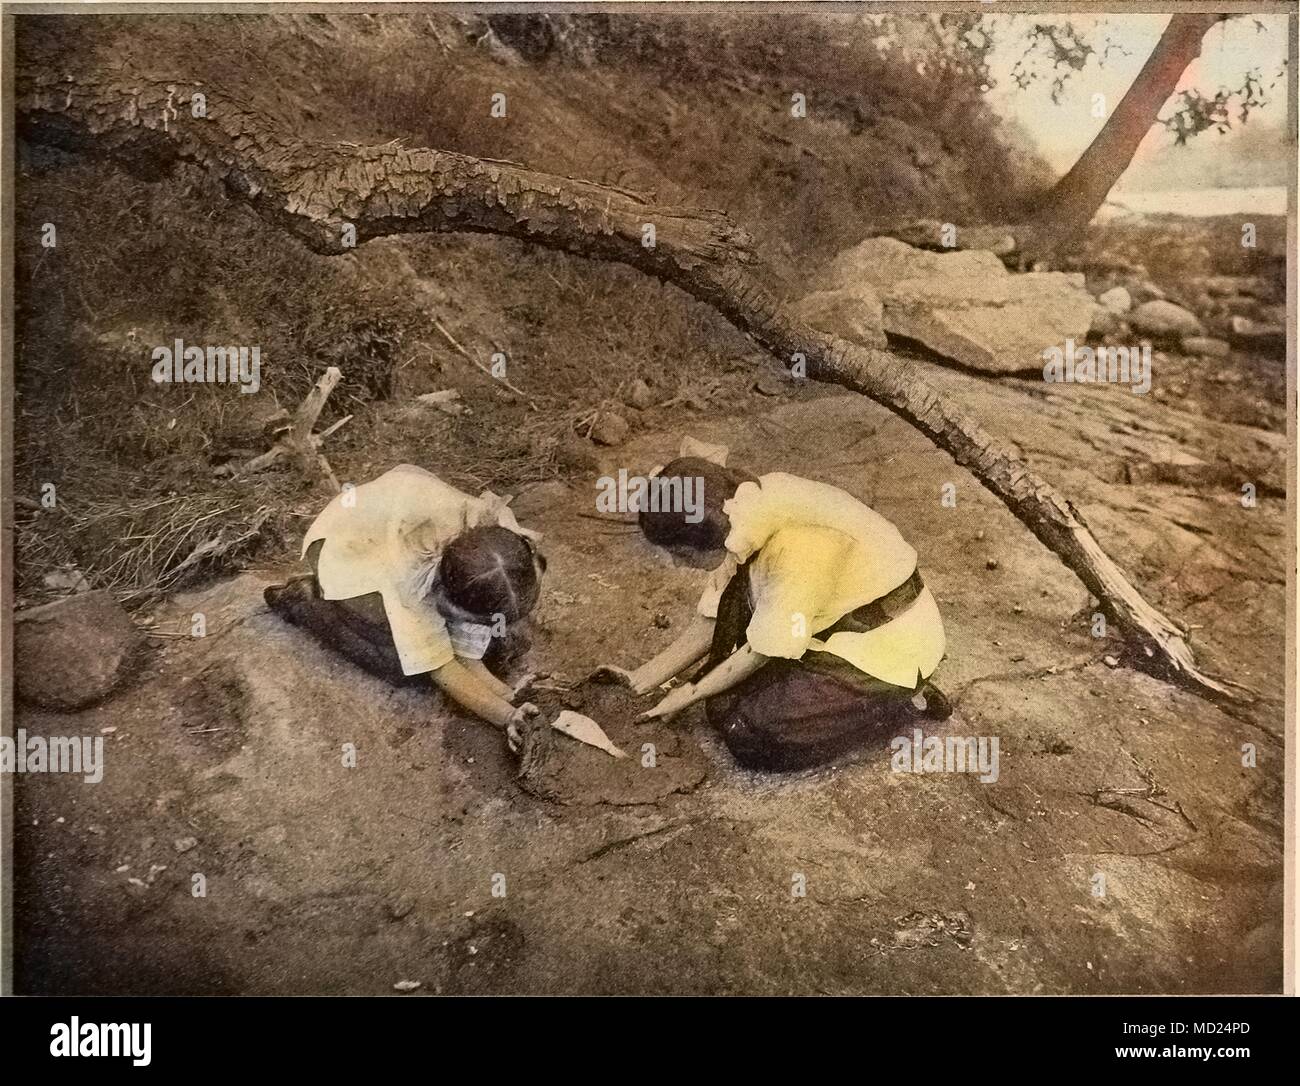 Black and white photograph of two women outdoors, preparing a fish for baking by rubbing soft clay on it, 1905. Courtesy Internet Archive. Note: Image has been digitally colorized using a modern process. Colors may not be period-accurate. () Stock Photo